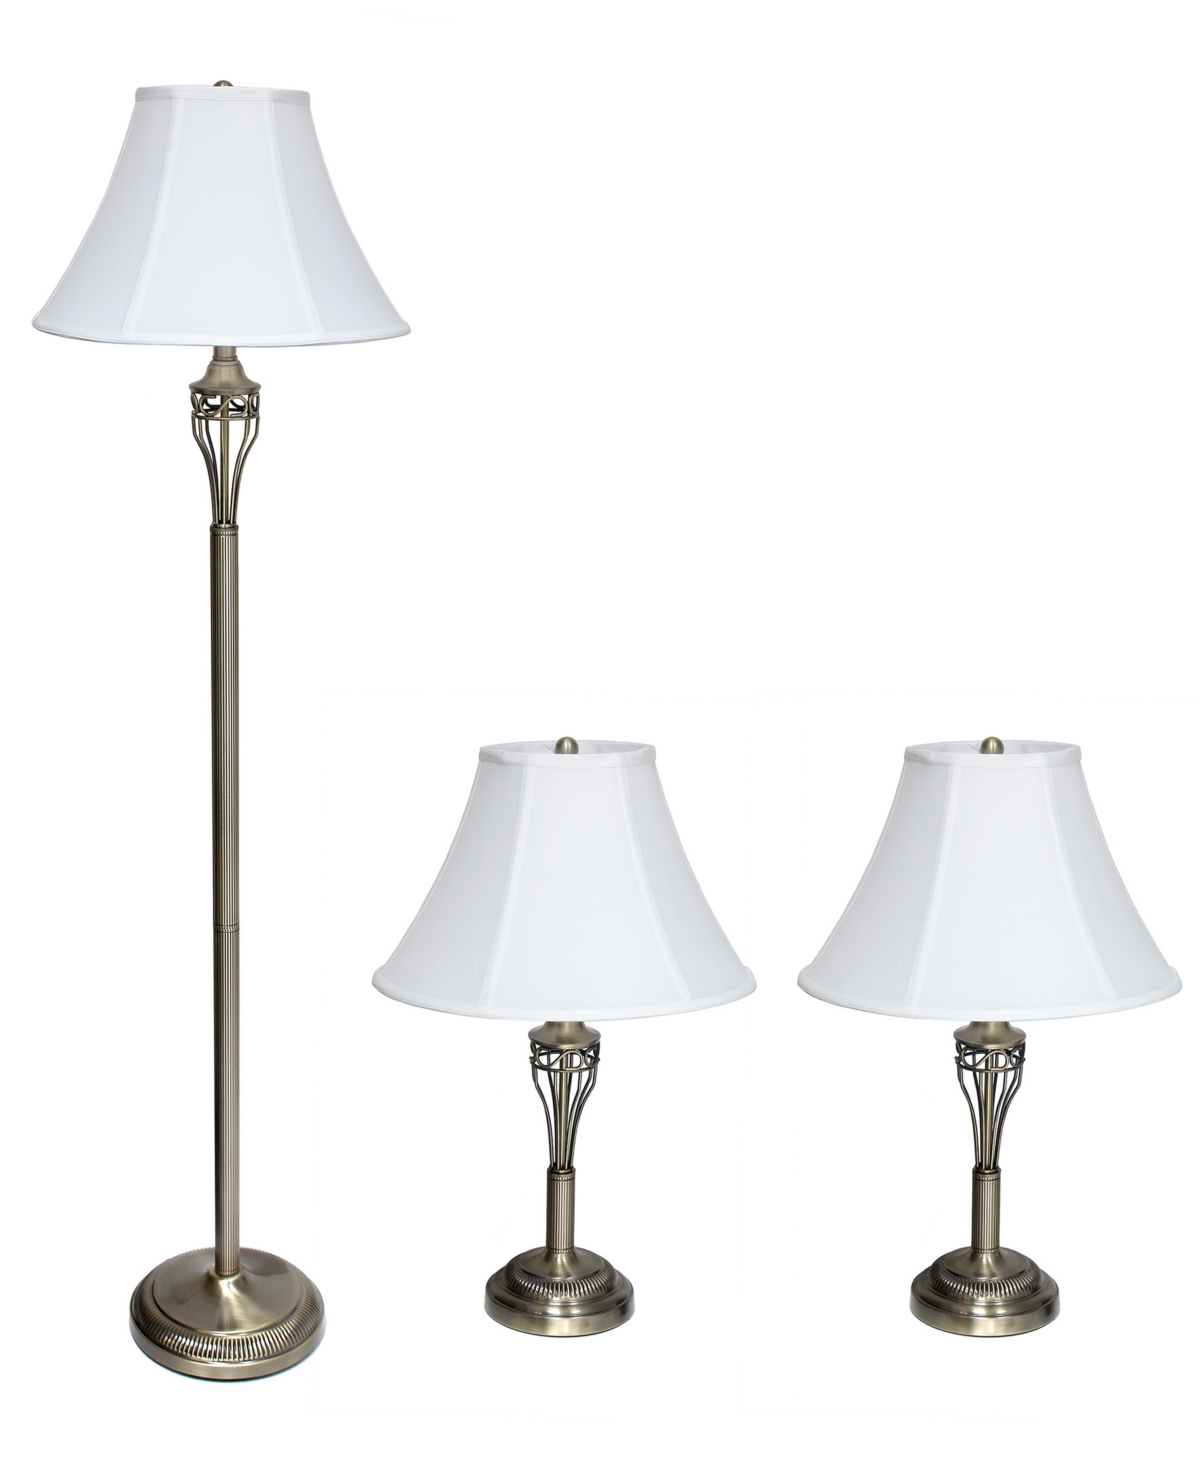 All The Rages Lalia Home Roma Classic 3 Piece Metal Lamp Set In Antique Brass